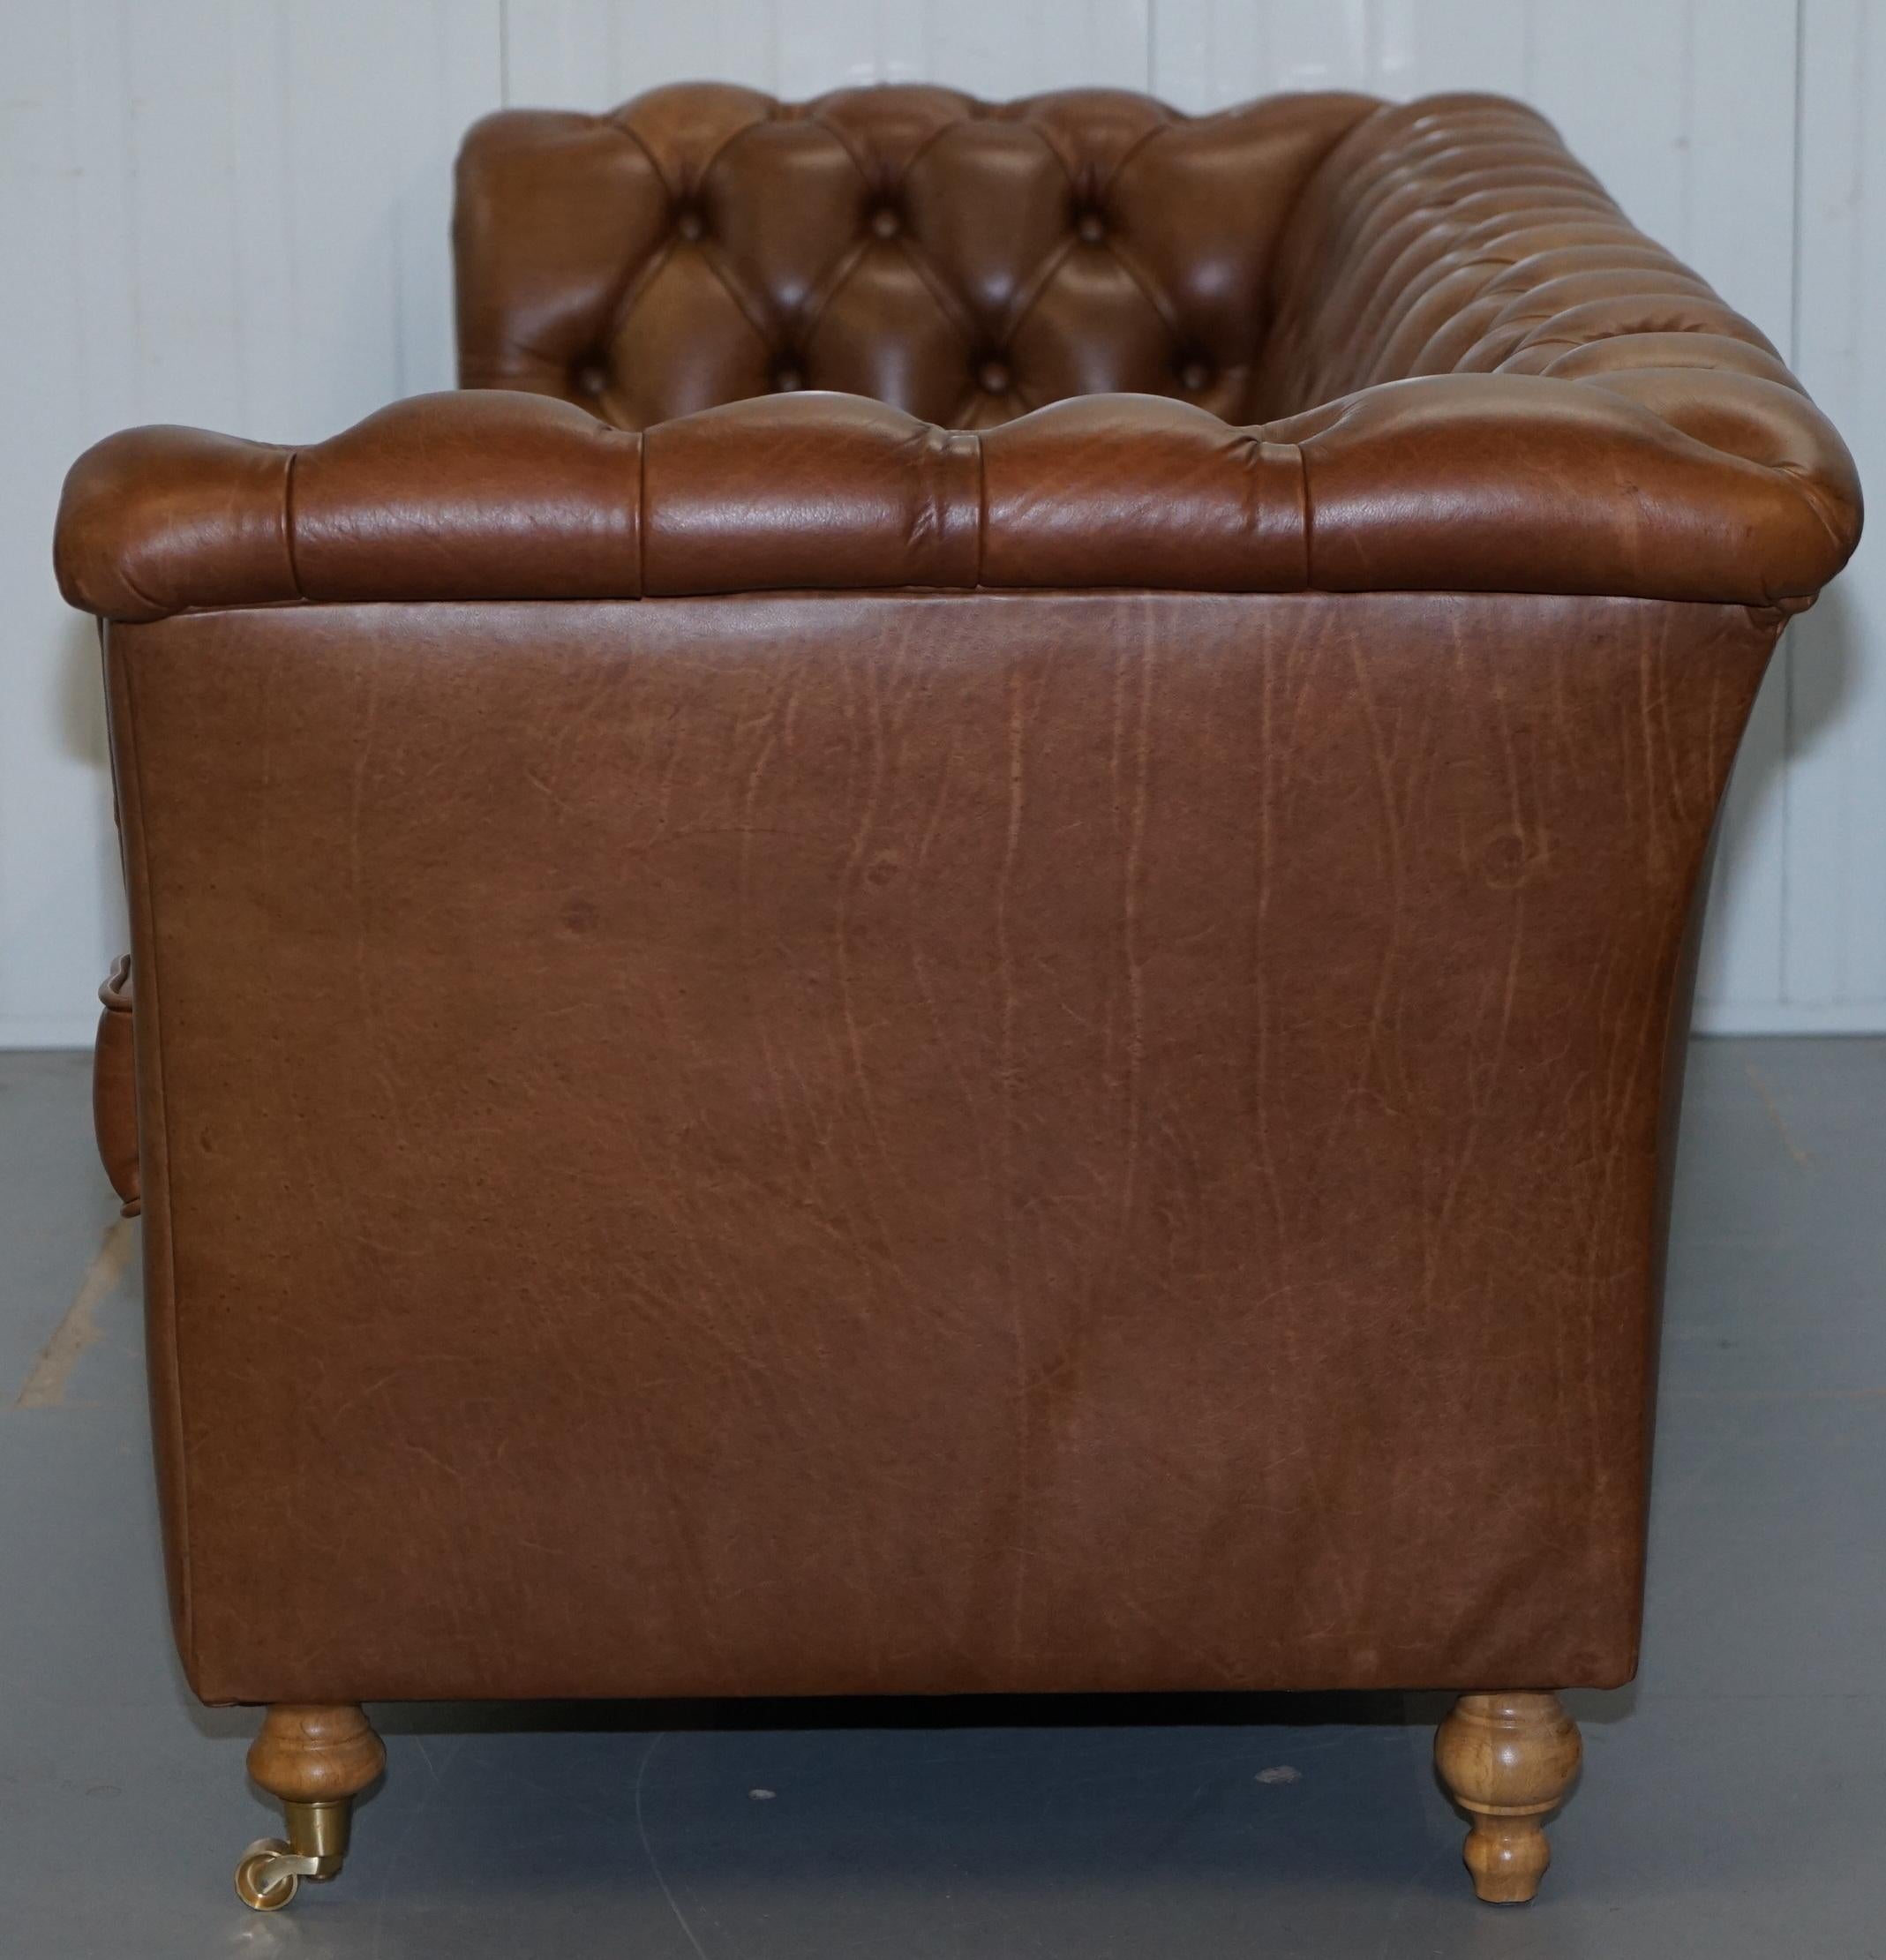 Chestnut Brown Leather Chesterfield Sofa with Turned Oak Legs and Castors 9